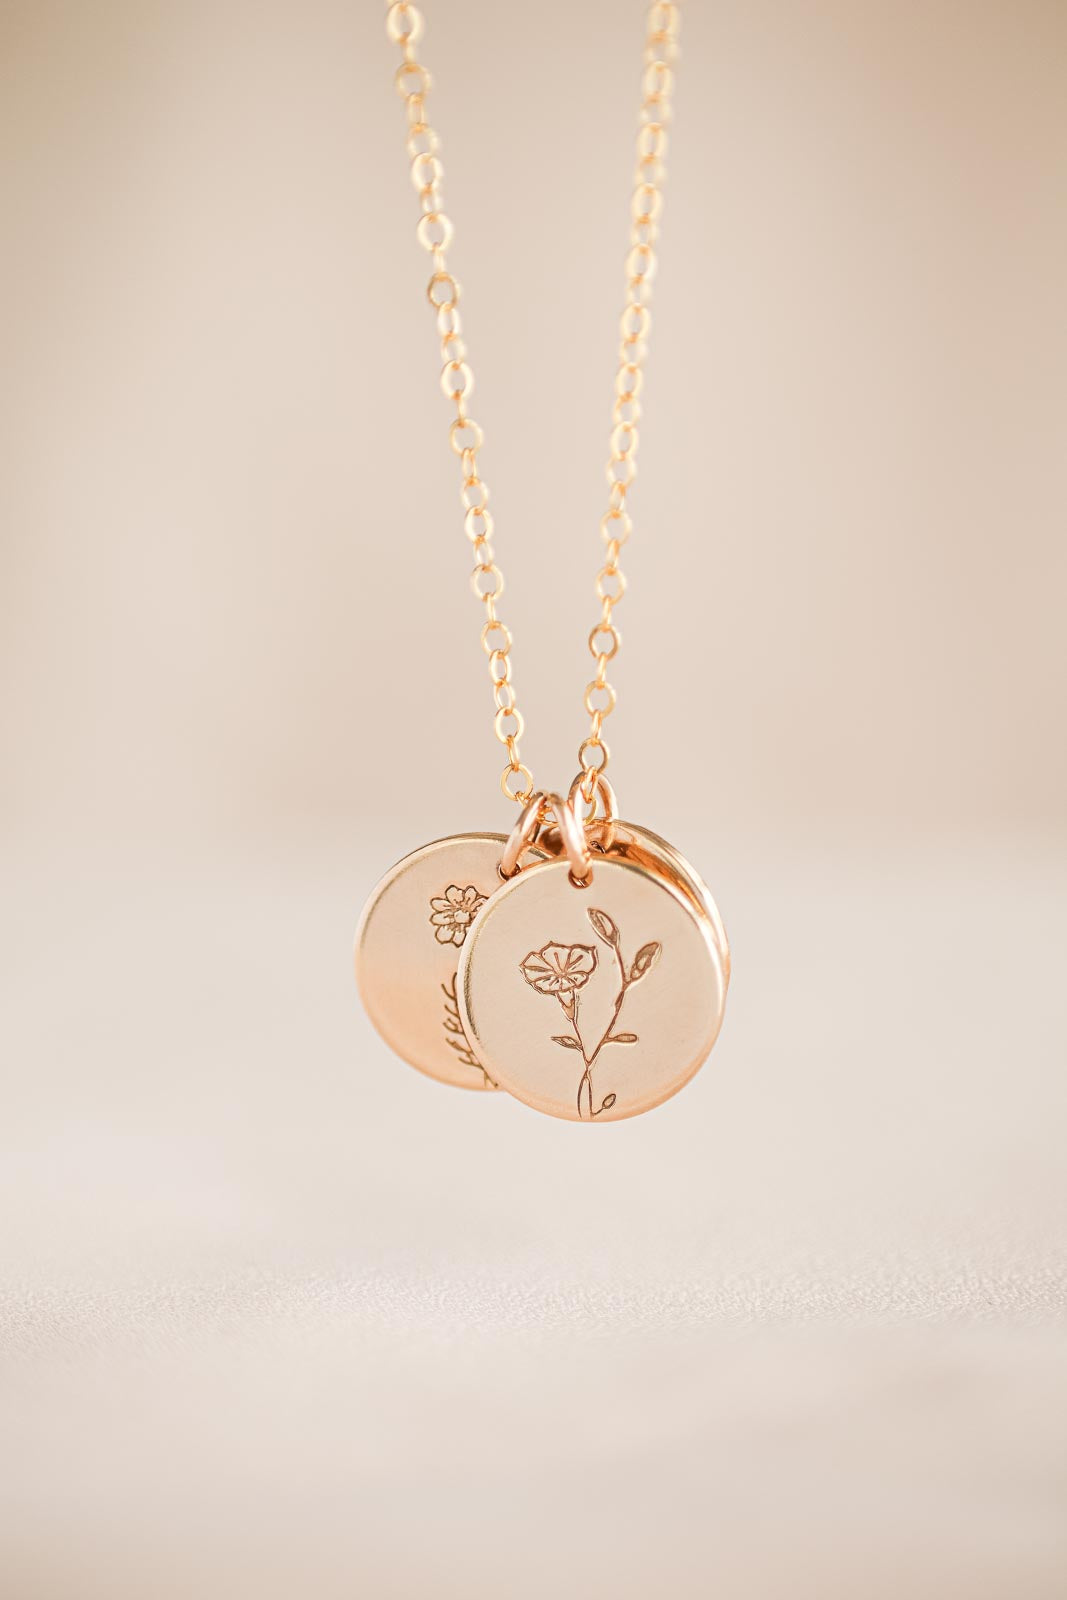 Classic Birth Flower Necklace - More Flower Options